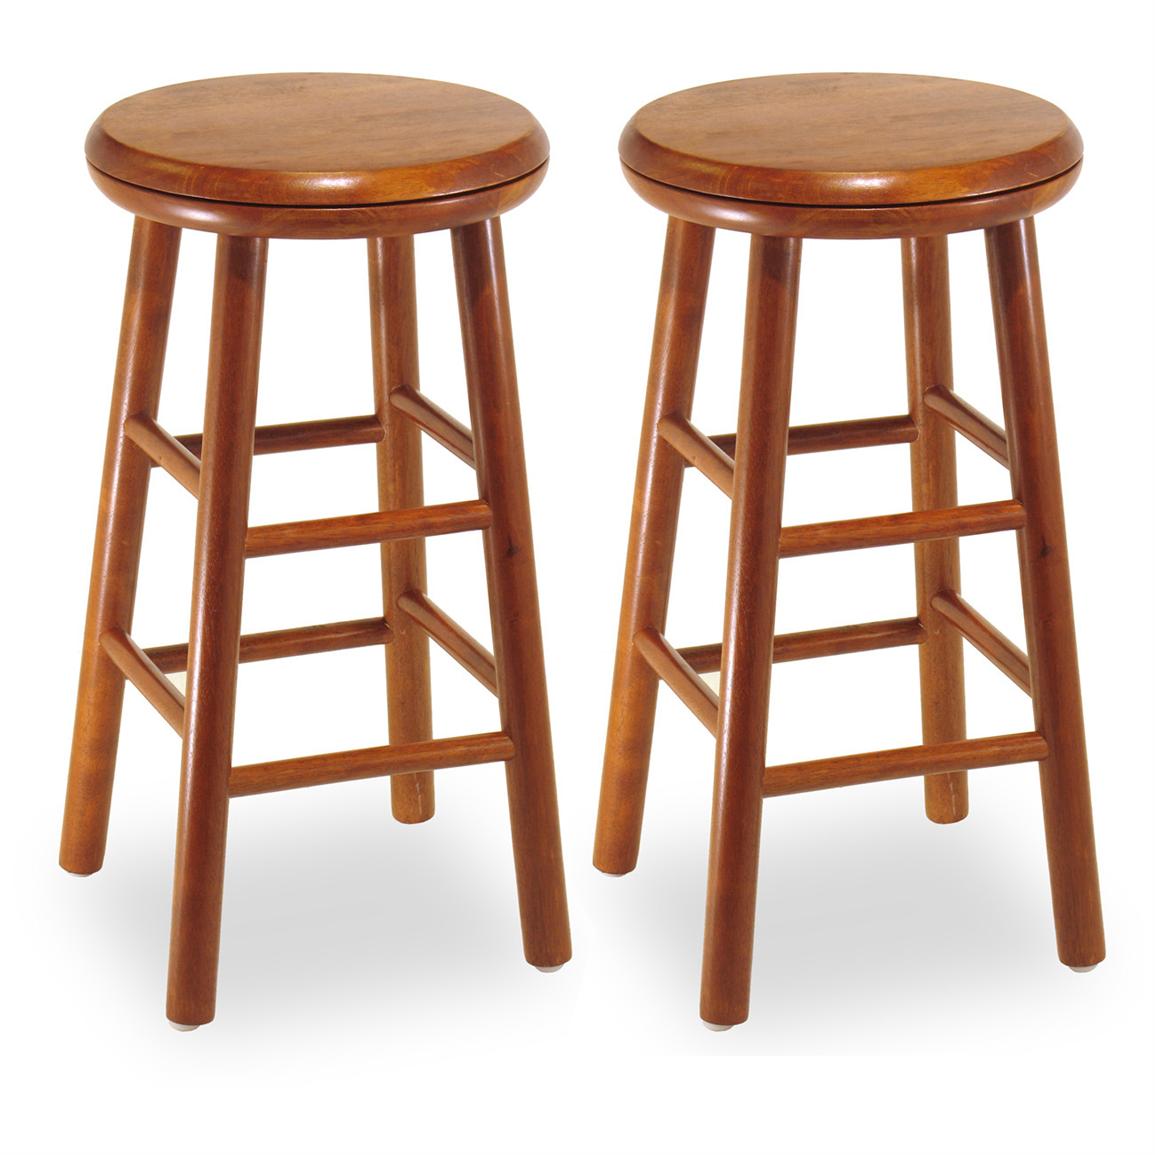 Winsome Set Of 2 Cherry 24 Backless Swivel Stools 151015 Kitchen And Dining Stools At